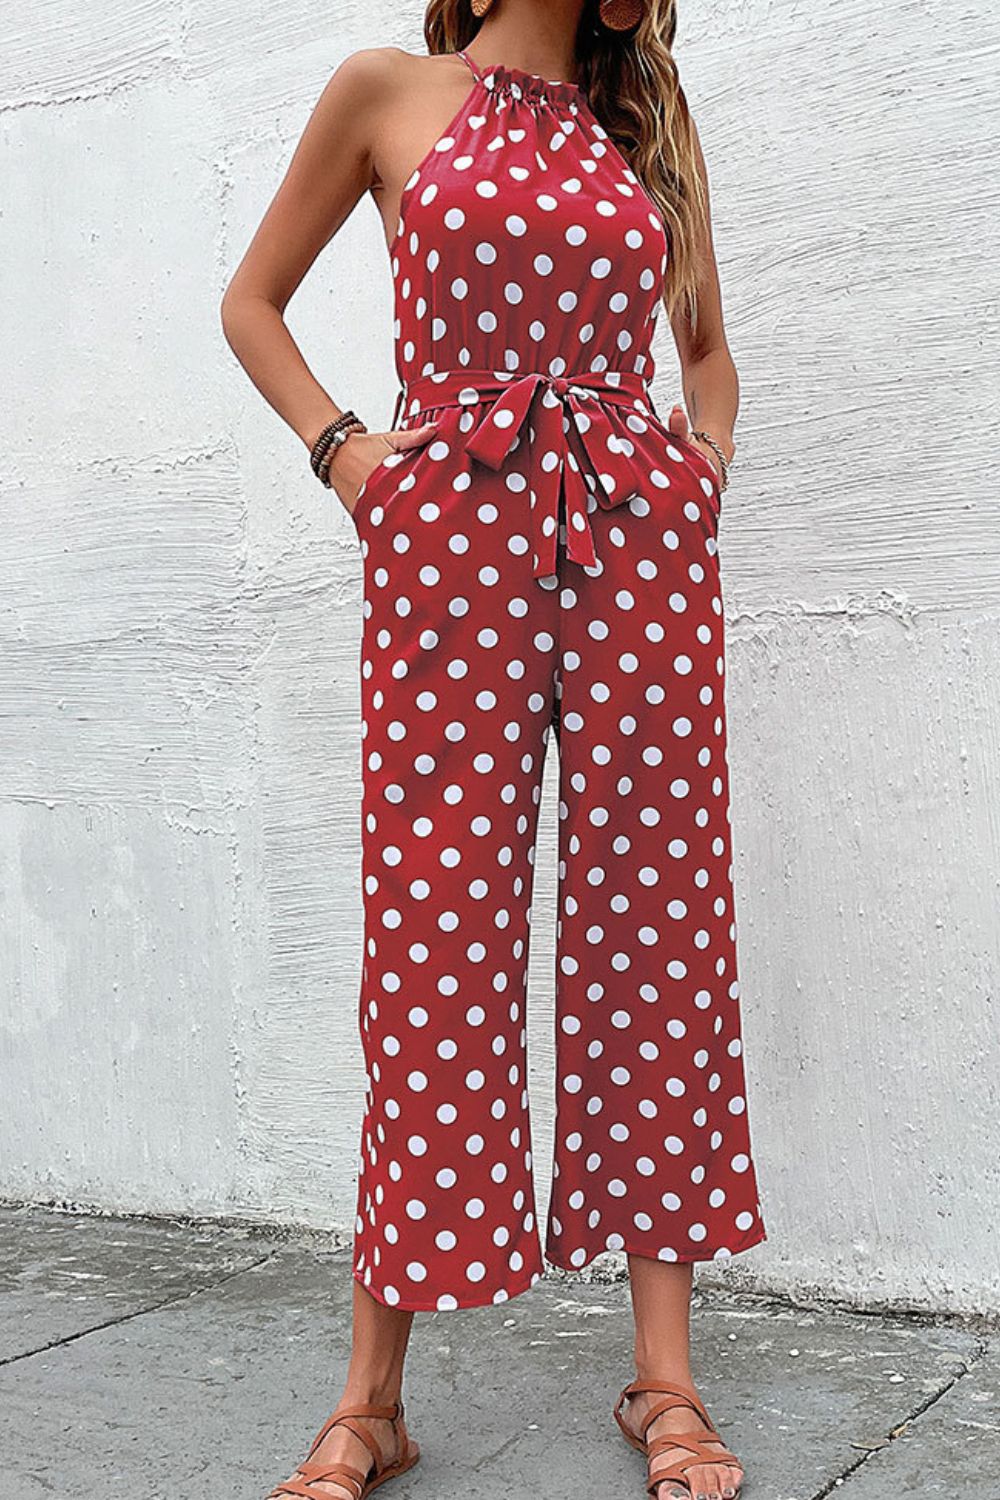 Elegant Polka Dot Grecian Jumpsuit in pink, navy, or red. Perfect for a sleek look with comfort and versatility for any occasion